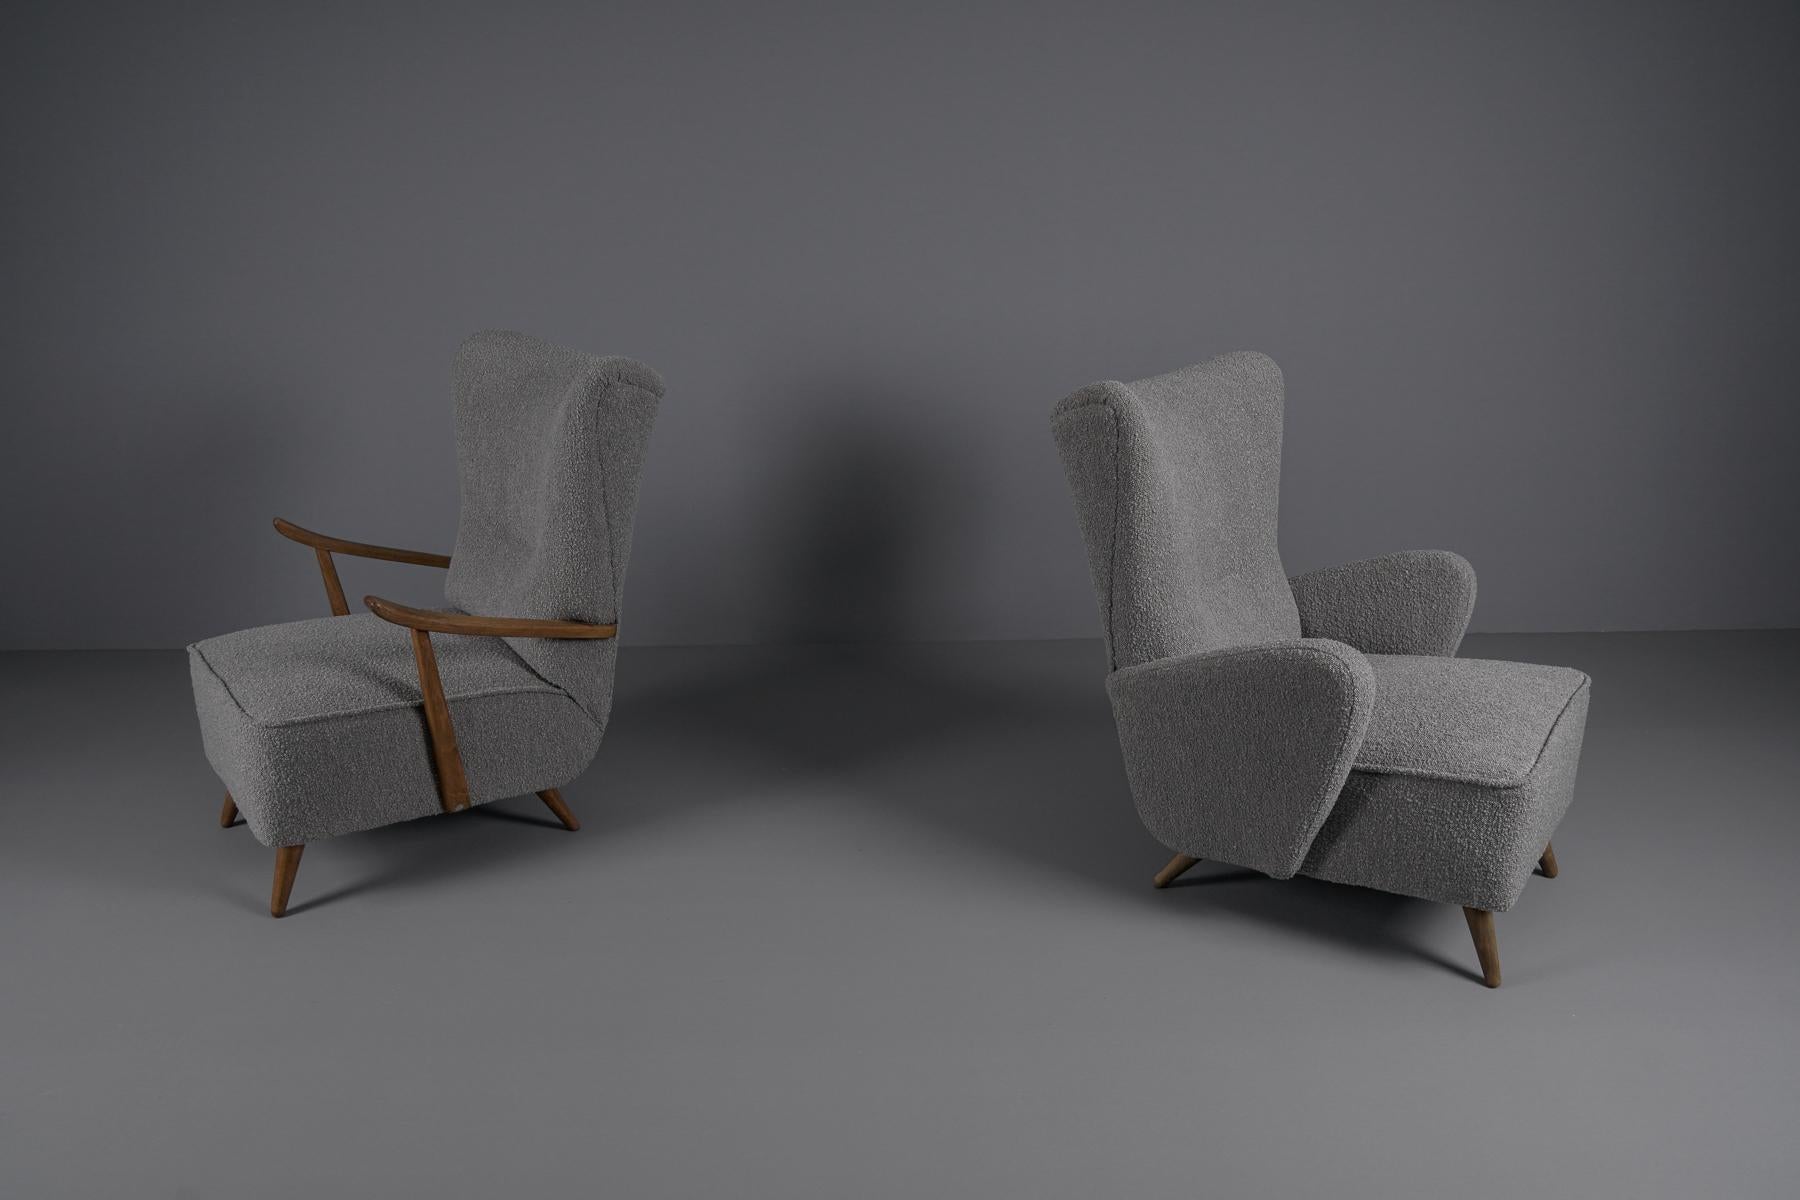 Bouclé Pair of Large Wingback Armchairs in Grey Boucle Fabric, 1950s For Sale